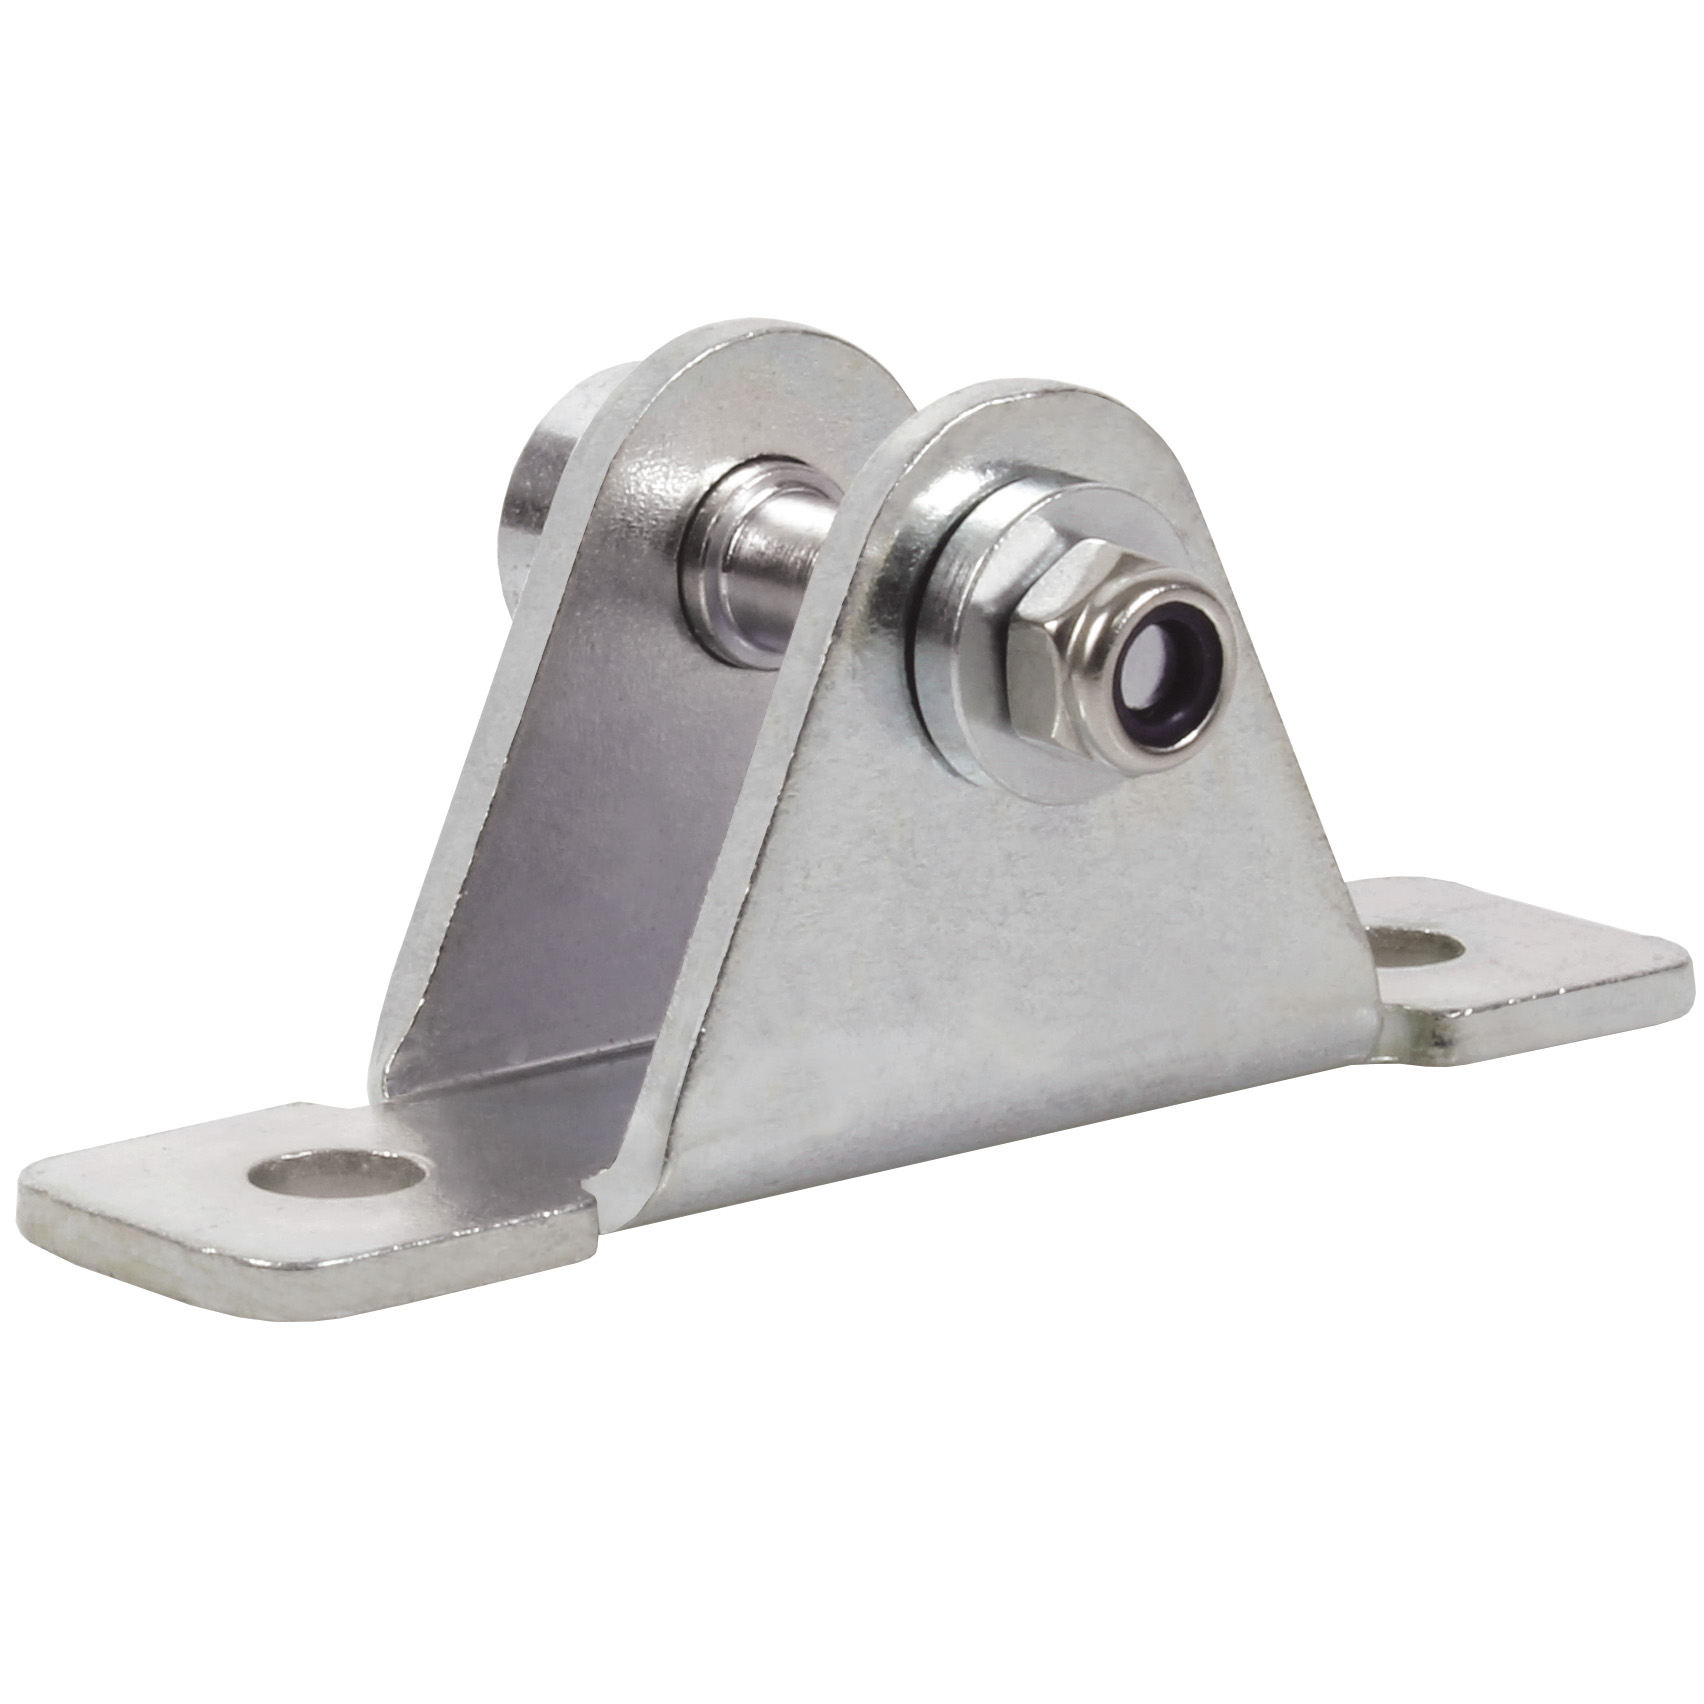 Straight clevis - Straight clevis for use with a male clevis - Steel - 